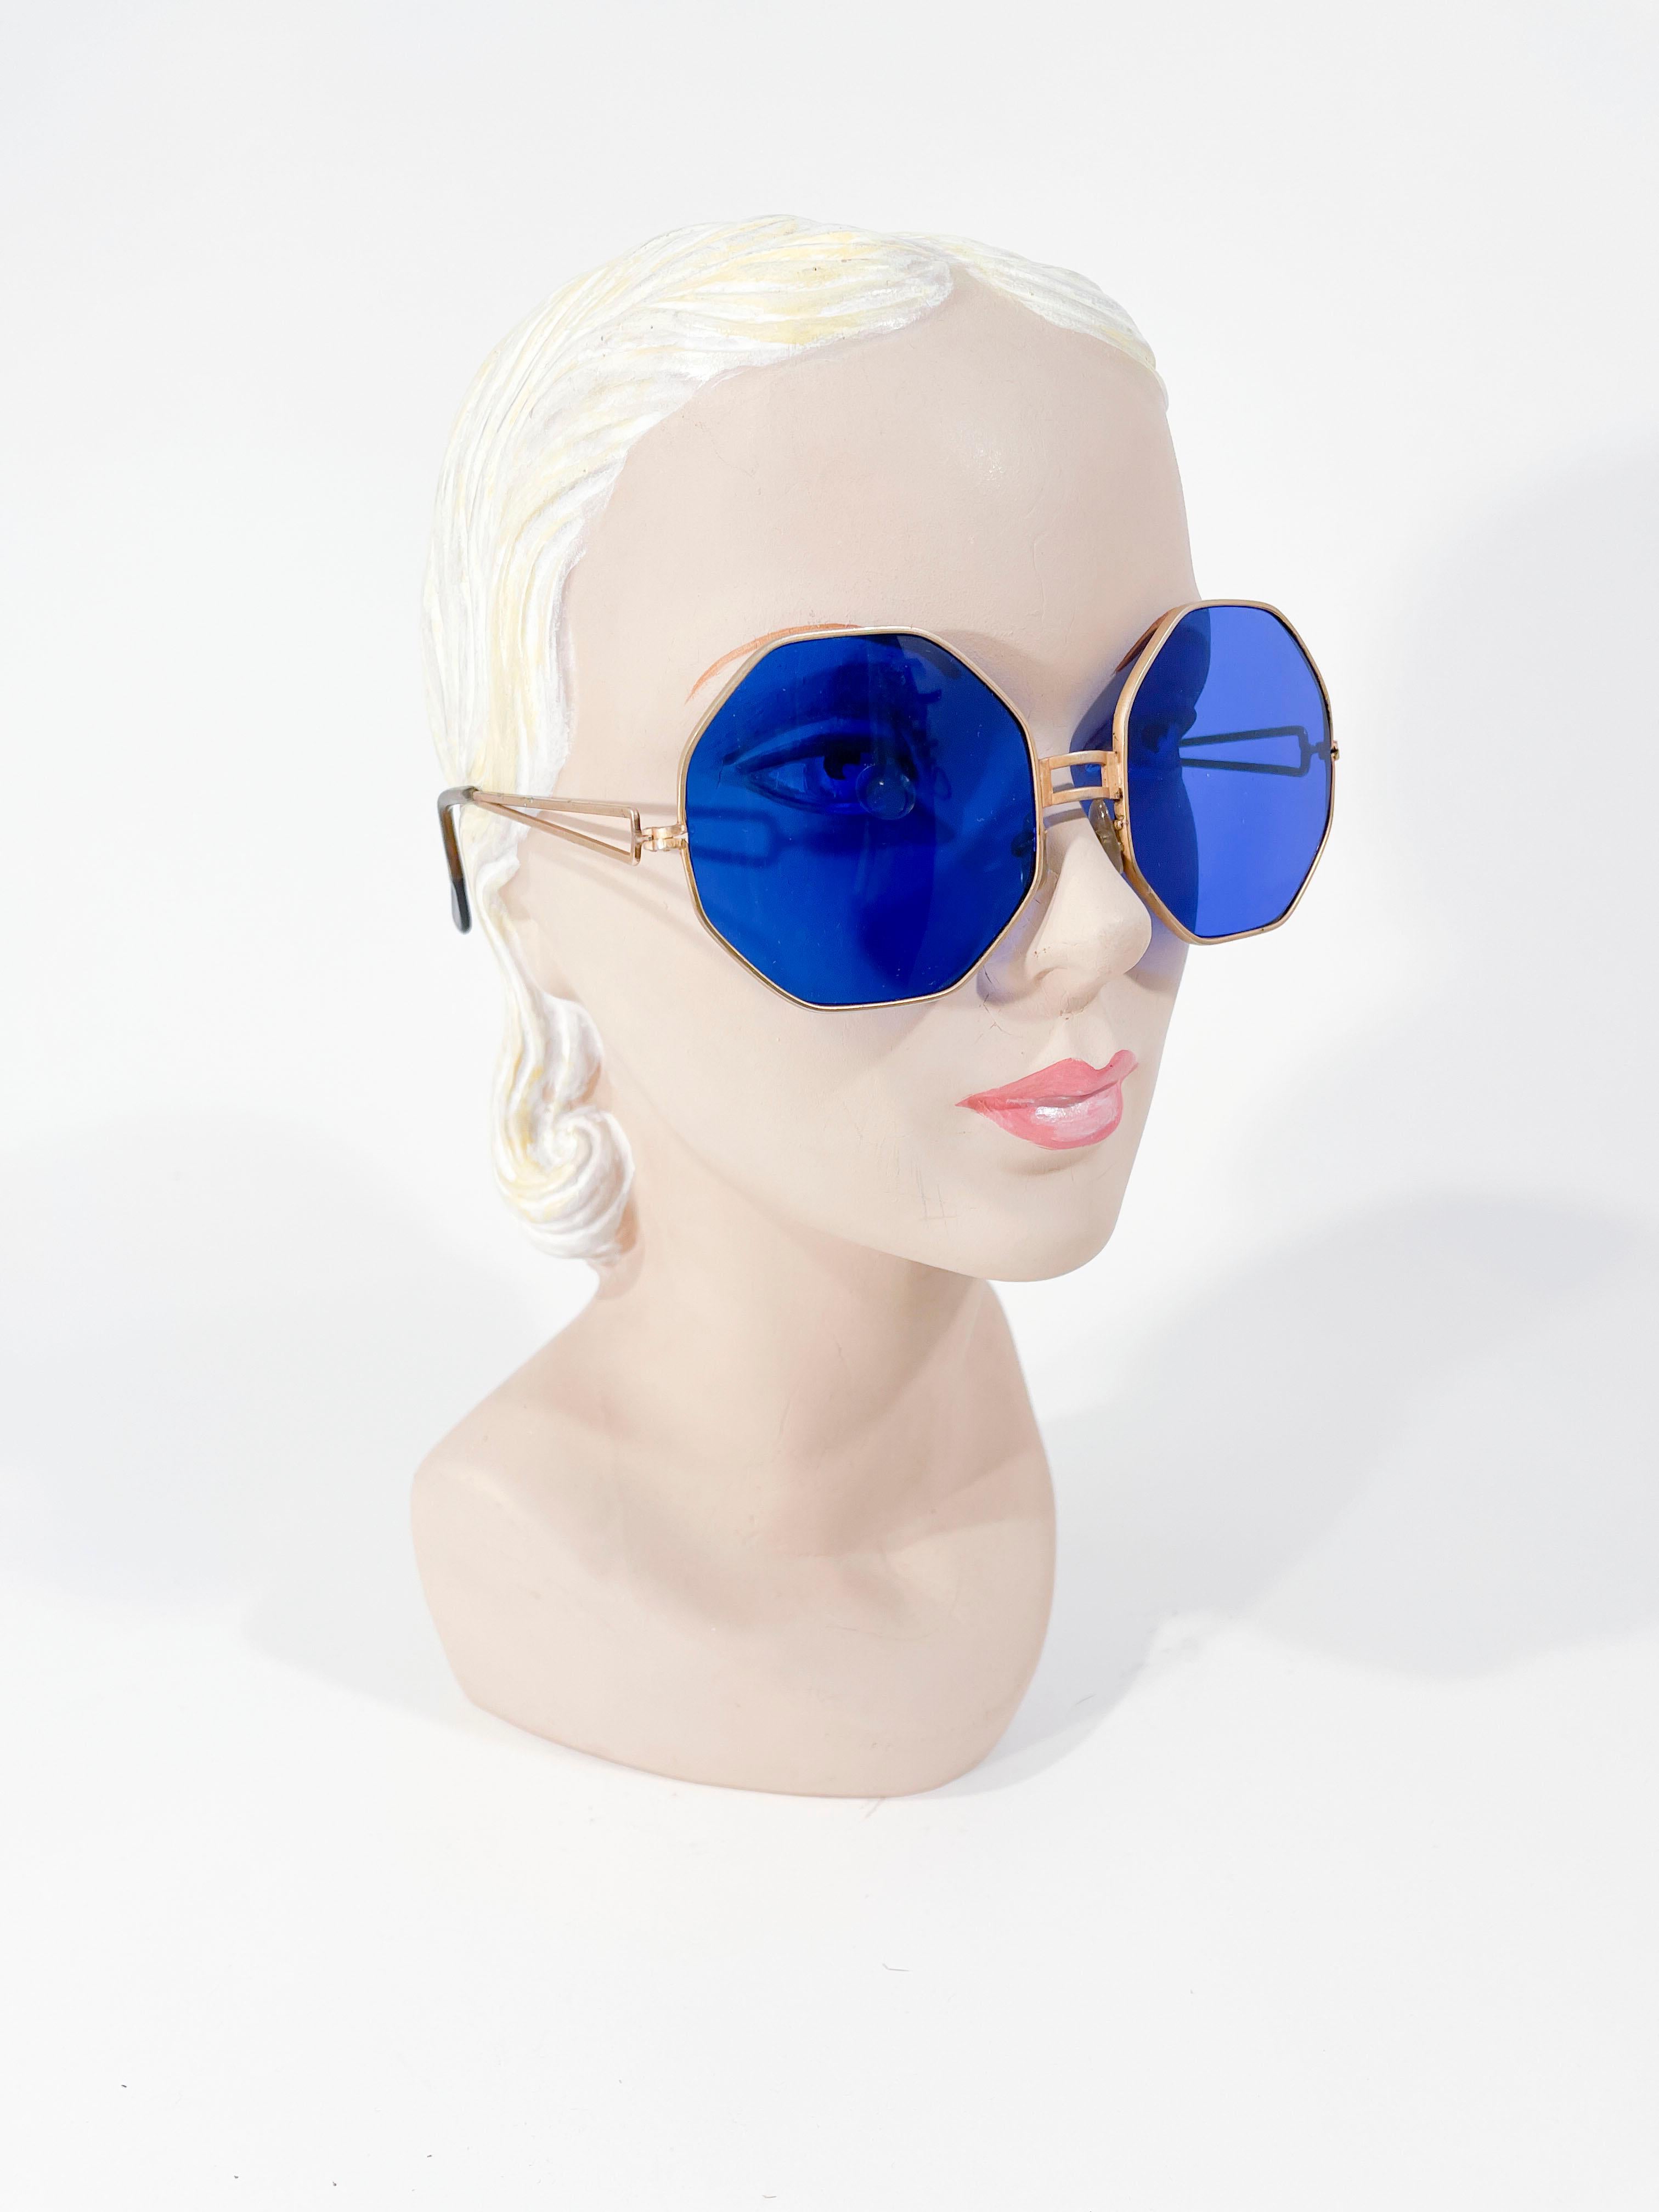 1930's Art Deco cobalt blue glass lensed sunglasses with brass frame and celliloid tipped arms. The lenses are oversized to capture the full frame of vision in the vivid blue shade. 